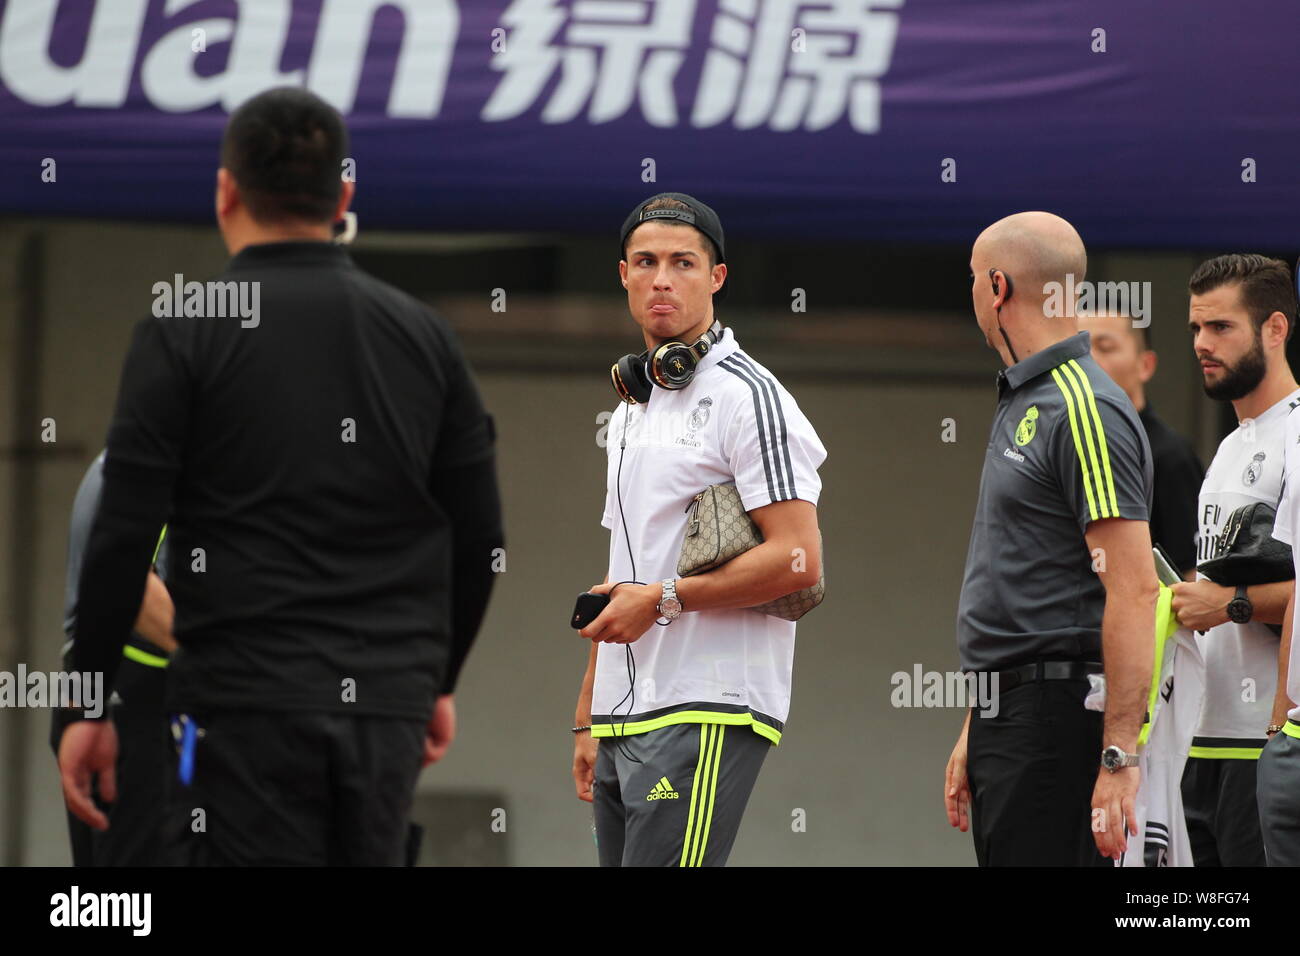 Cristiano Ronaldo of Real Madrid, center, arrives for a training session in Guangzhou city, south China's Guangdong province, 26 July 2015. Stock Photo